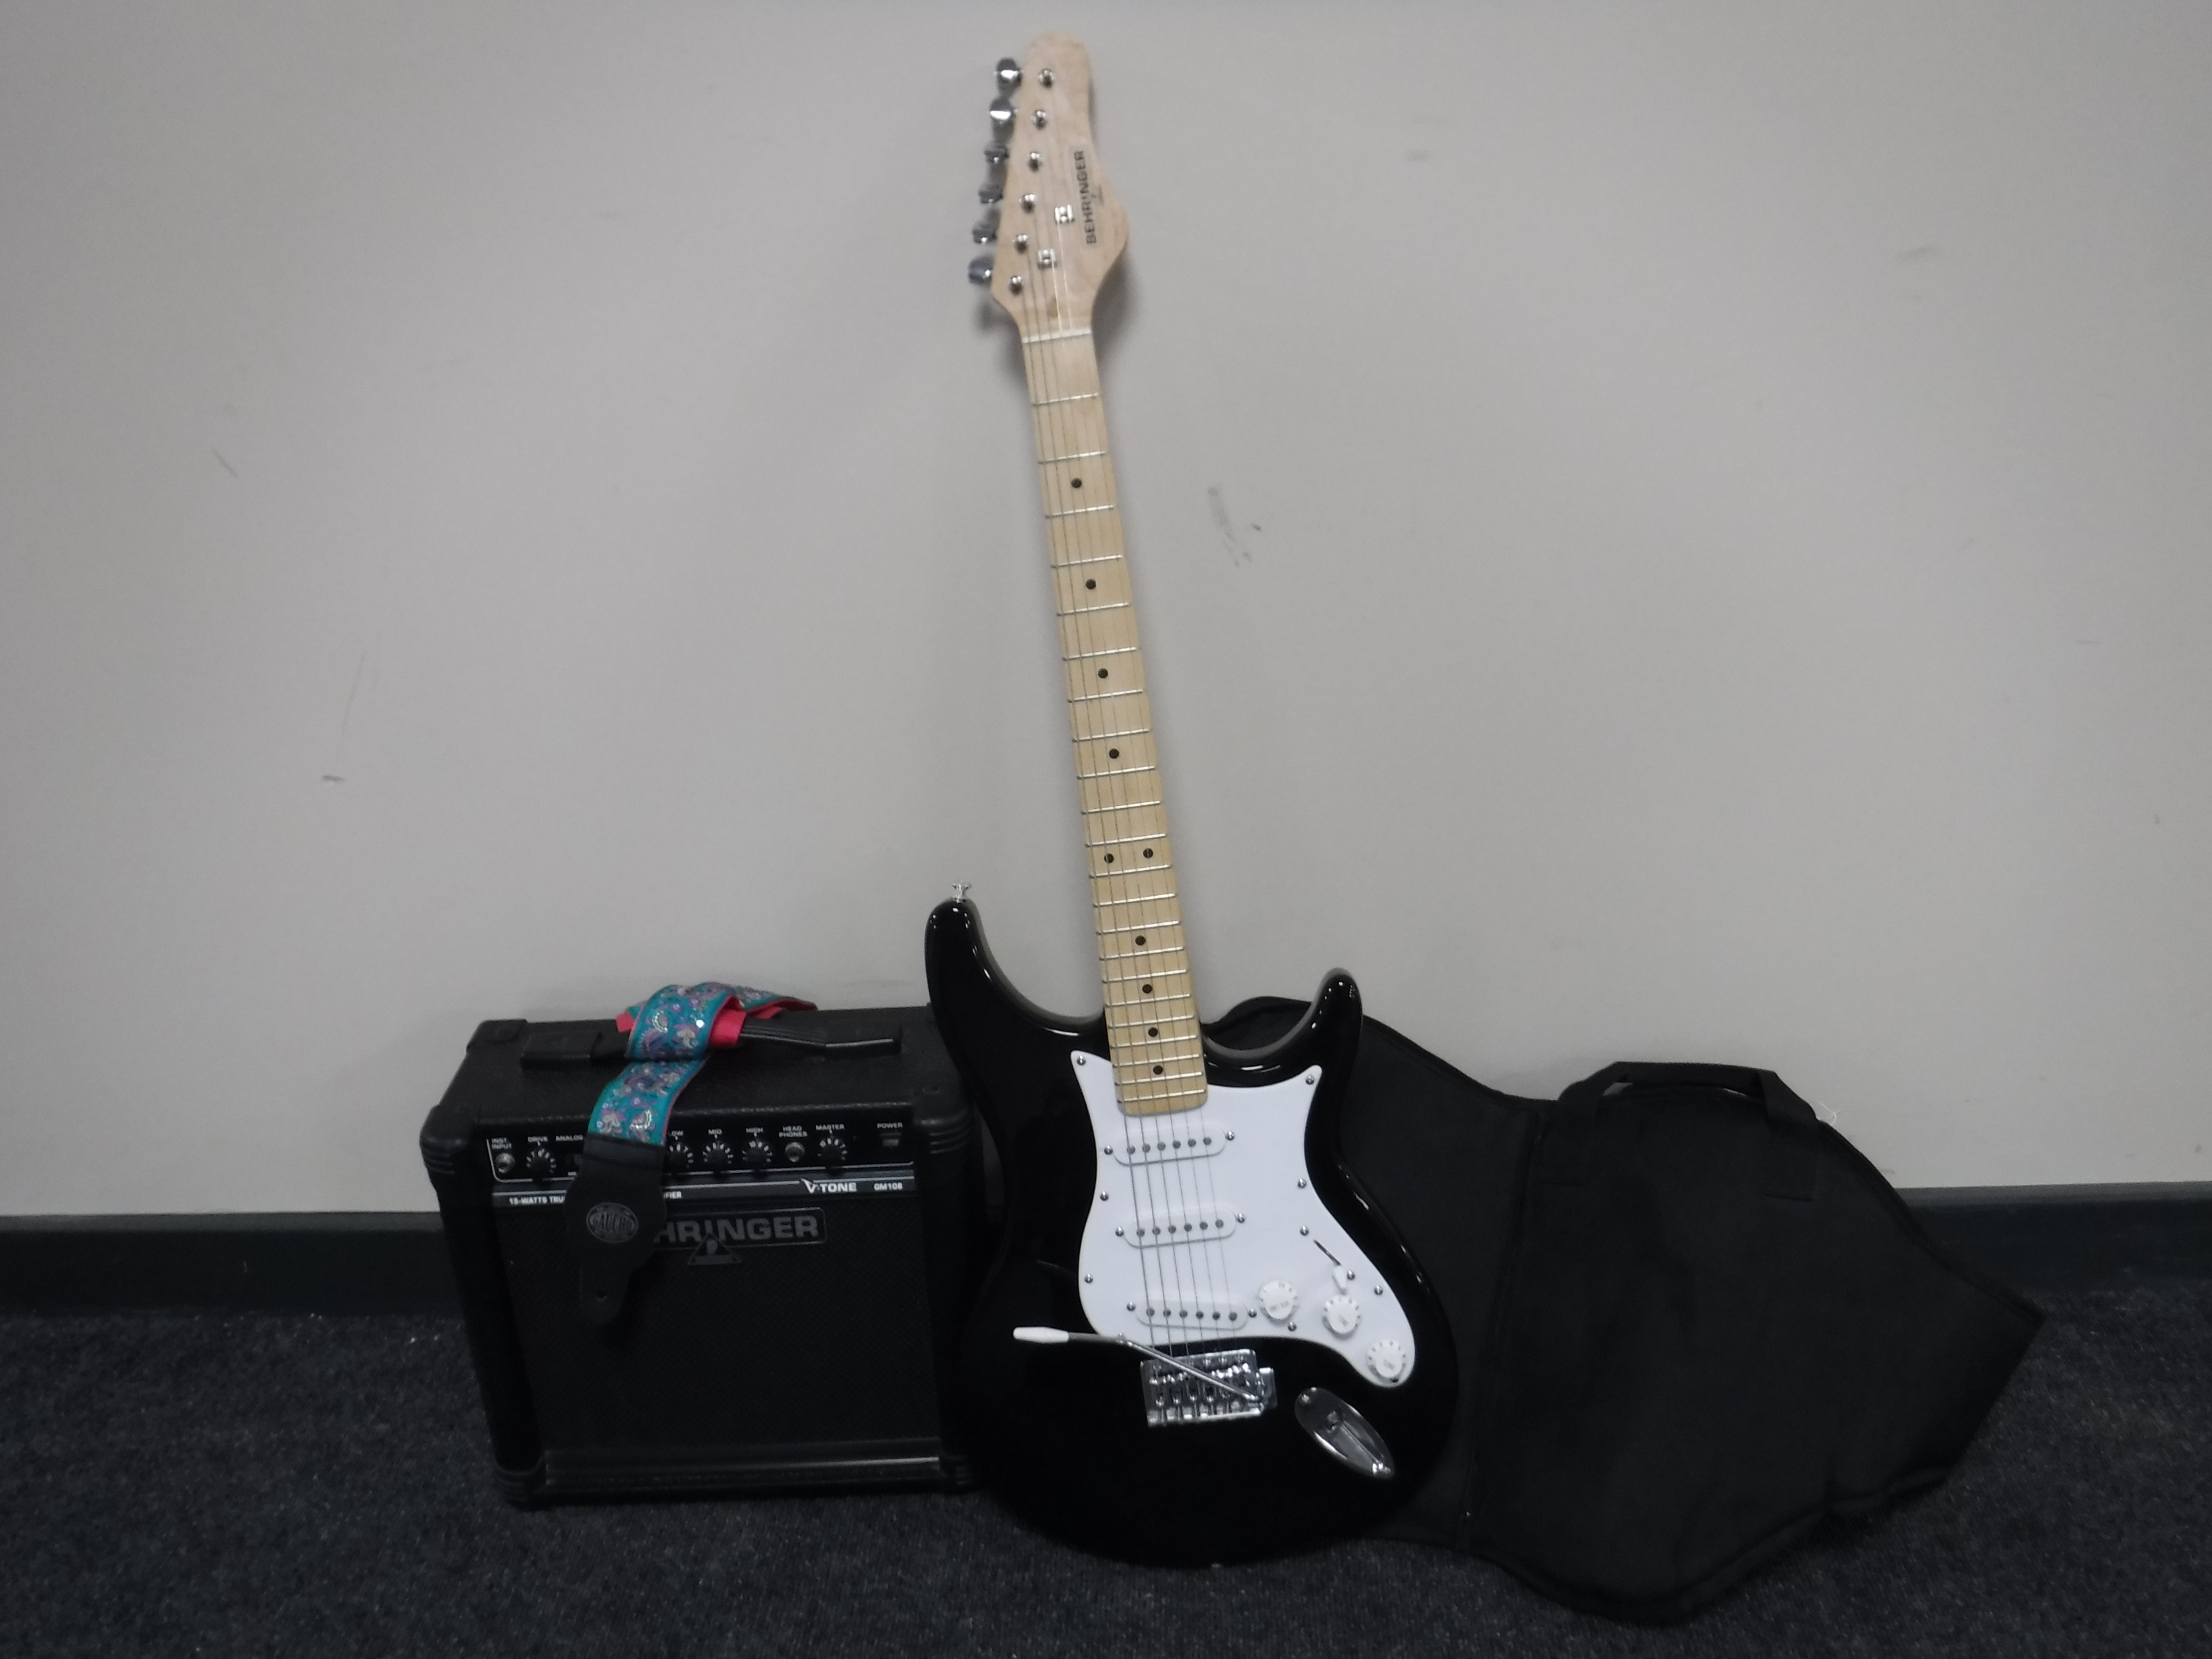 A Behringer electric guitar in carry bag with amp